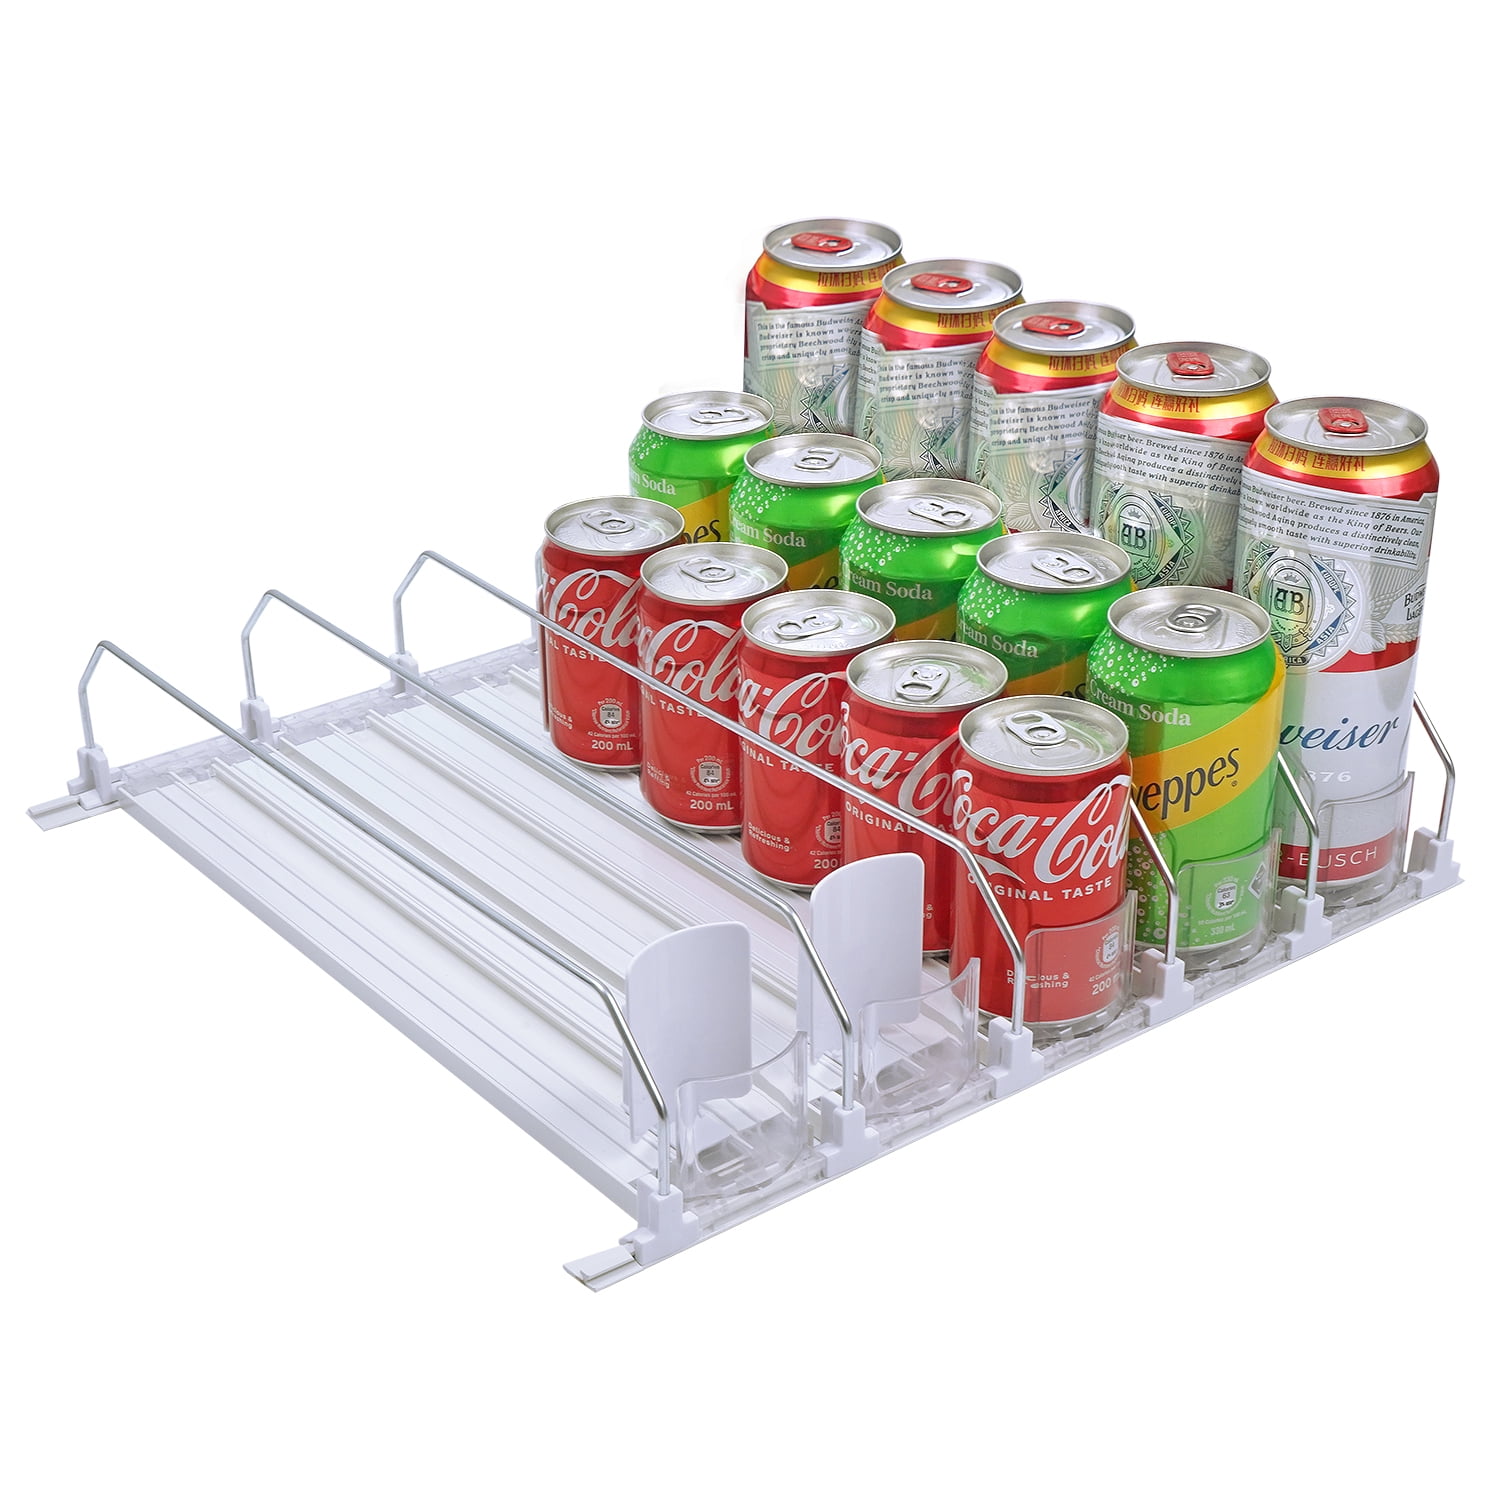 OnDisplay FIFO Refrigerator Soda/Beer Can Organizer - Stores 12 Cans in Fridge w/Auto Feed